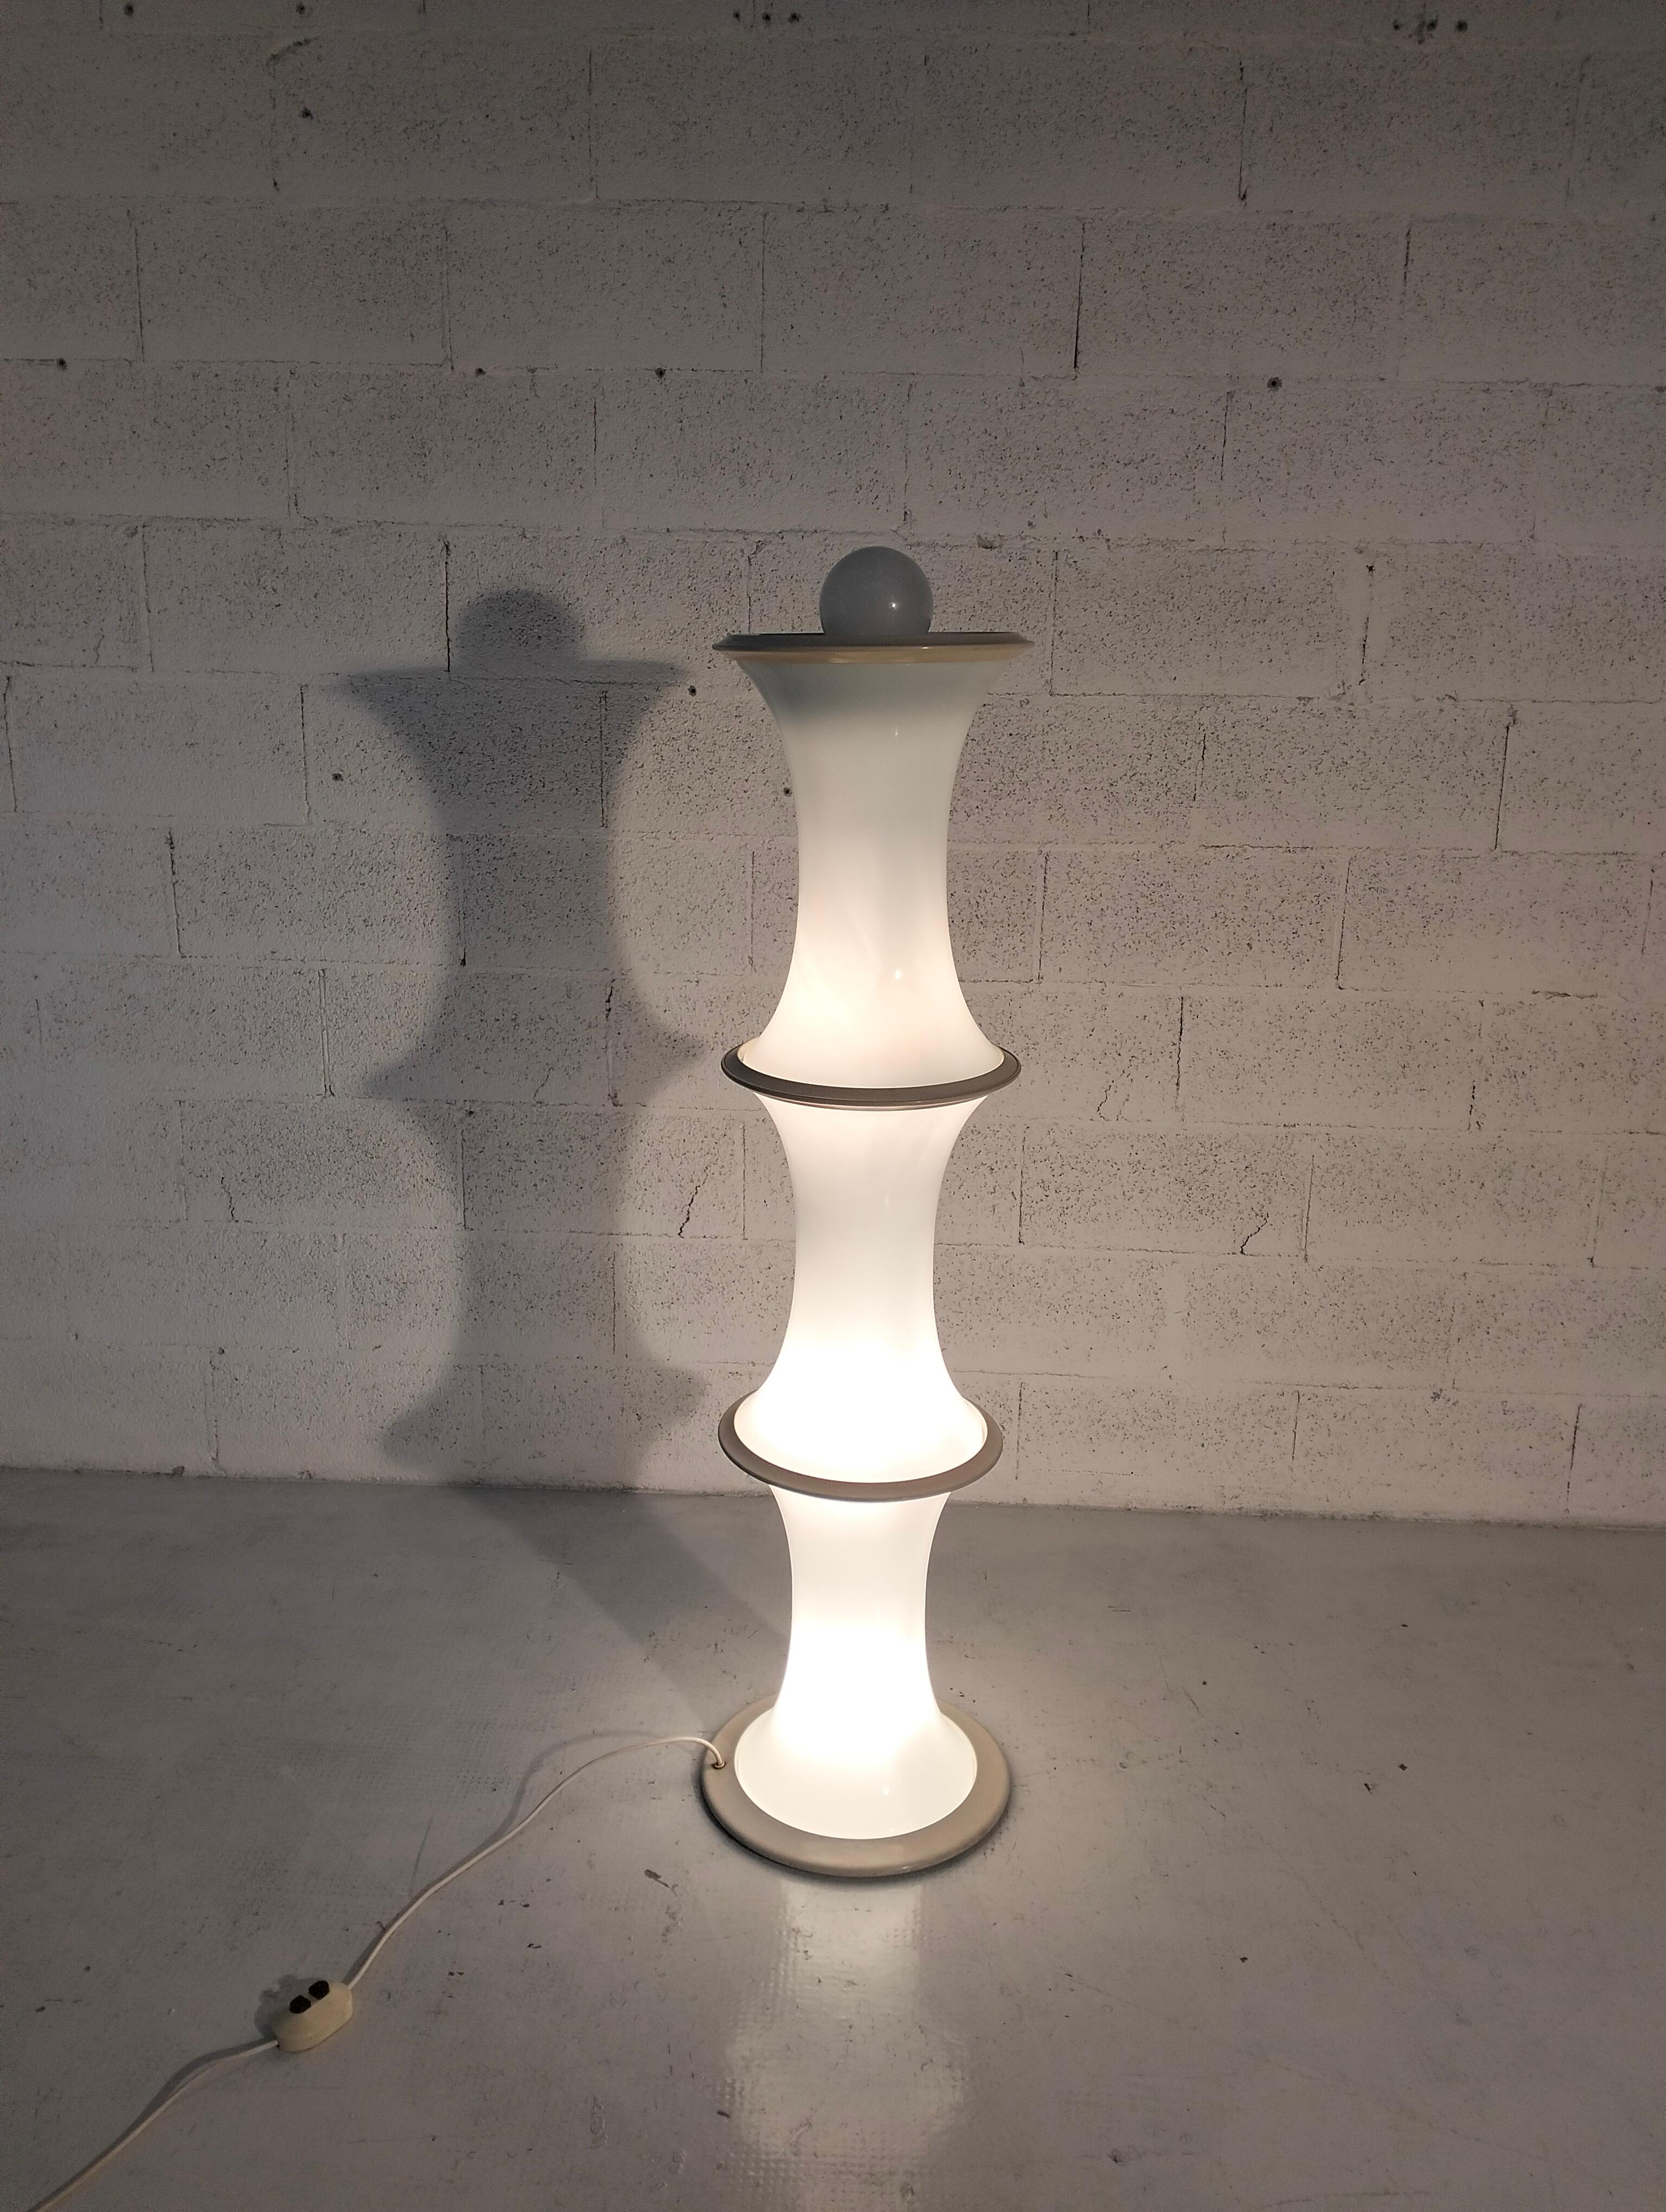 Italian Bamboo floor lamp by Enrico Tronconi for Vistosi - Murano - Italy - 70’s For Sale